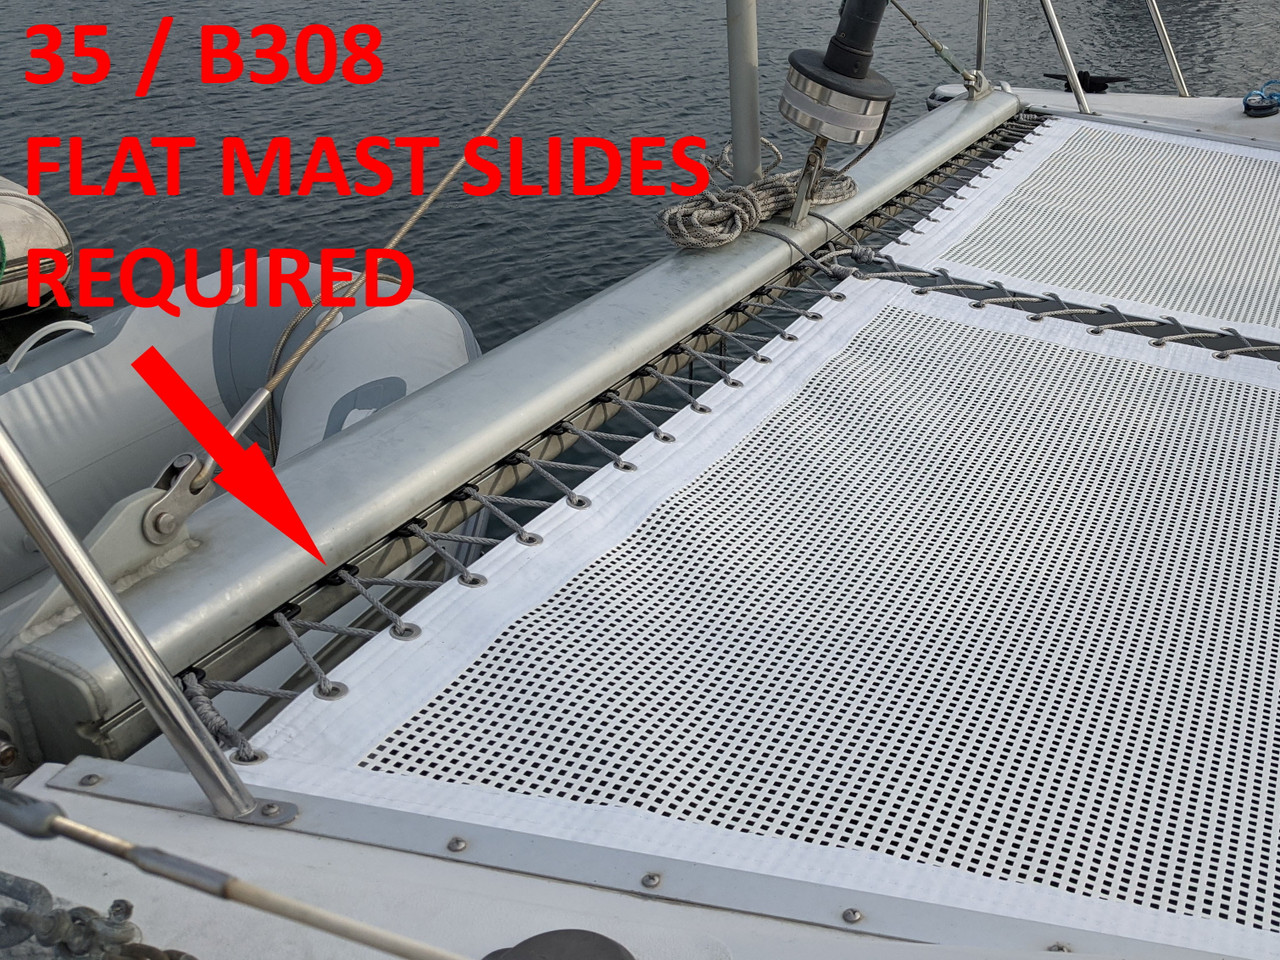 The redesigned PDQ 32 2pc Trampoline by SLO Sail and Canvas has omitted the OEM 3pc PDQ 32's forward "lacing strip" with grommets. To lace the SLO Sail and Canvas 2pc trampoline to your PDQ 32's forward crossbar you will need 35 / B308 Flat Mast Slides.